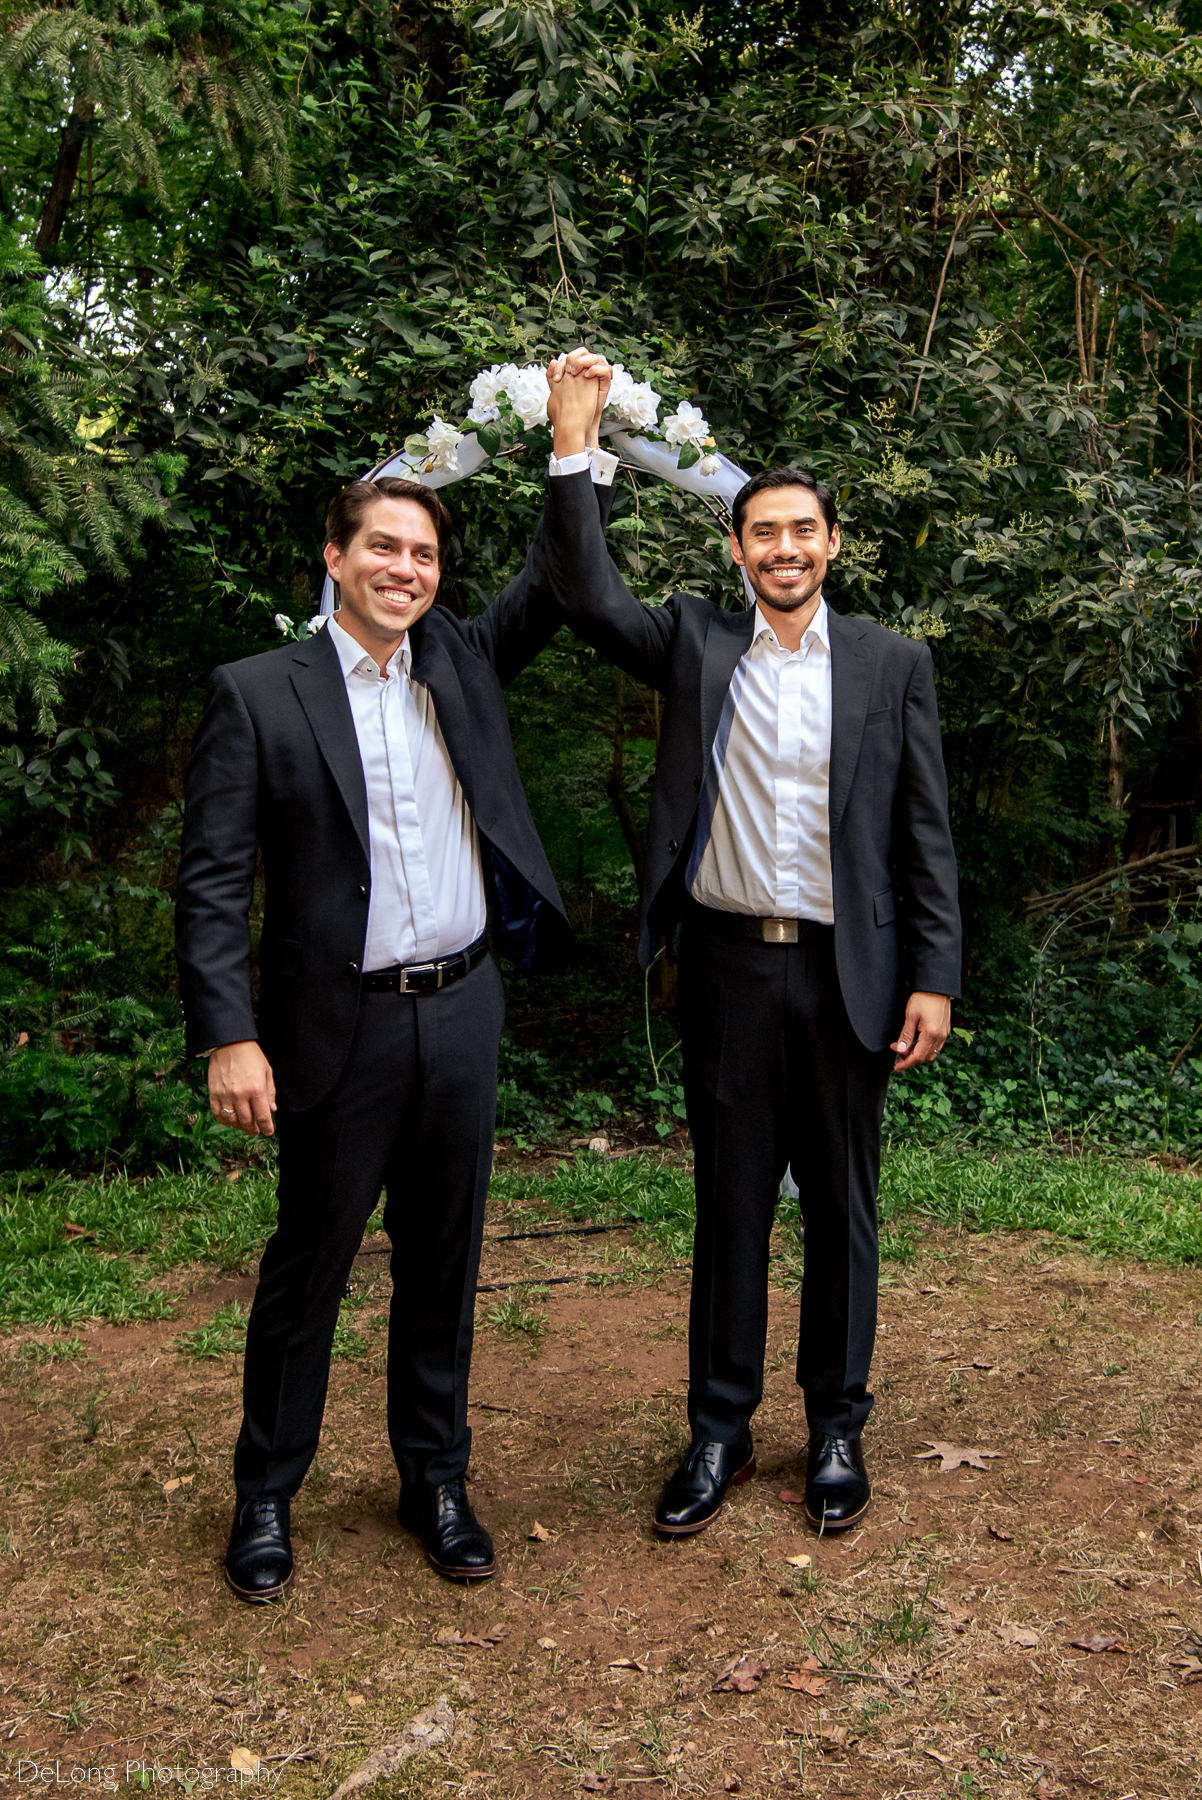 Two grooms raising hands together in joy after their same-sex elopement by Charlotte wedding photographers DeLong Photography